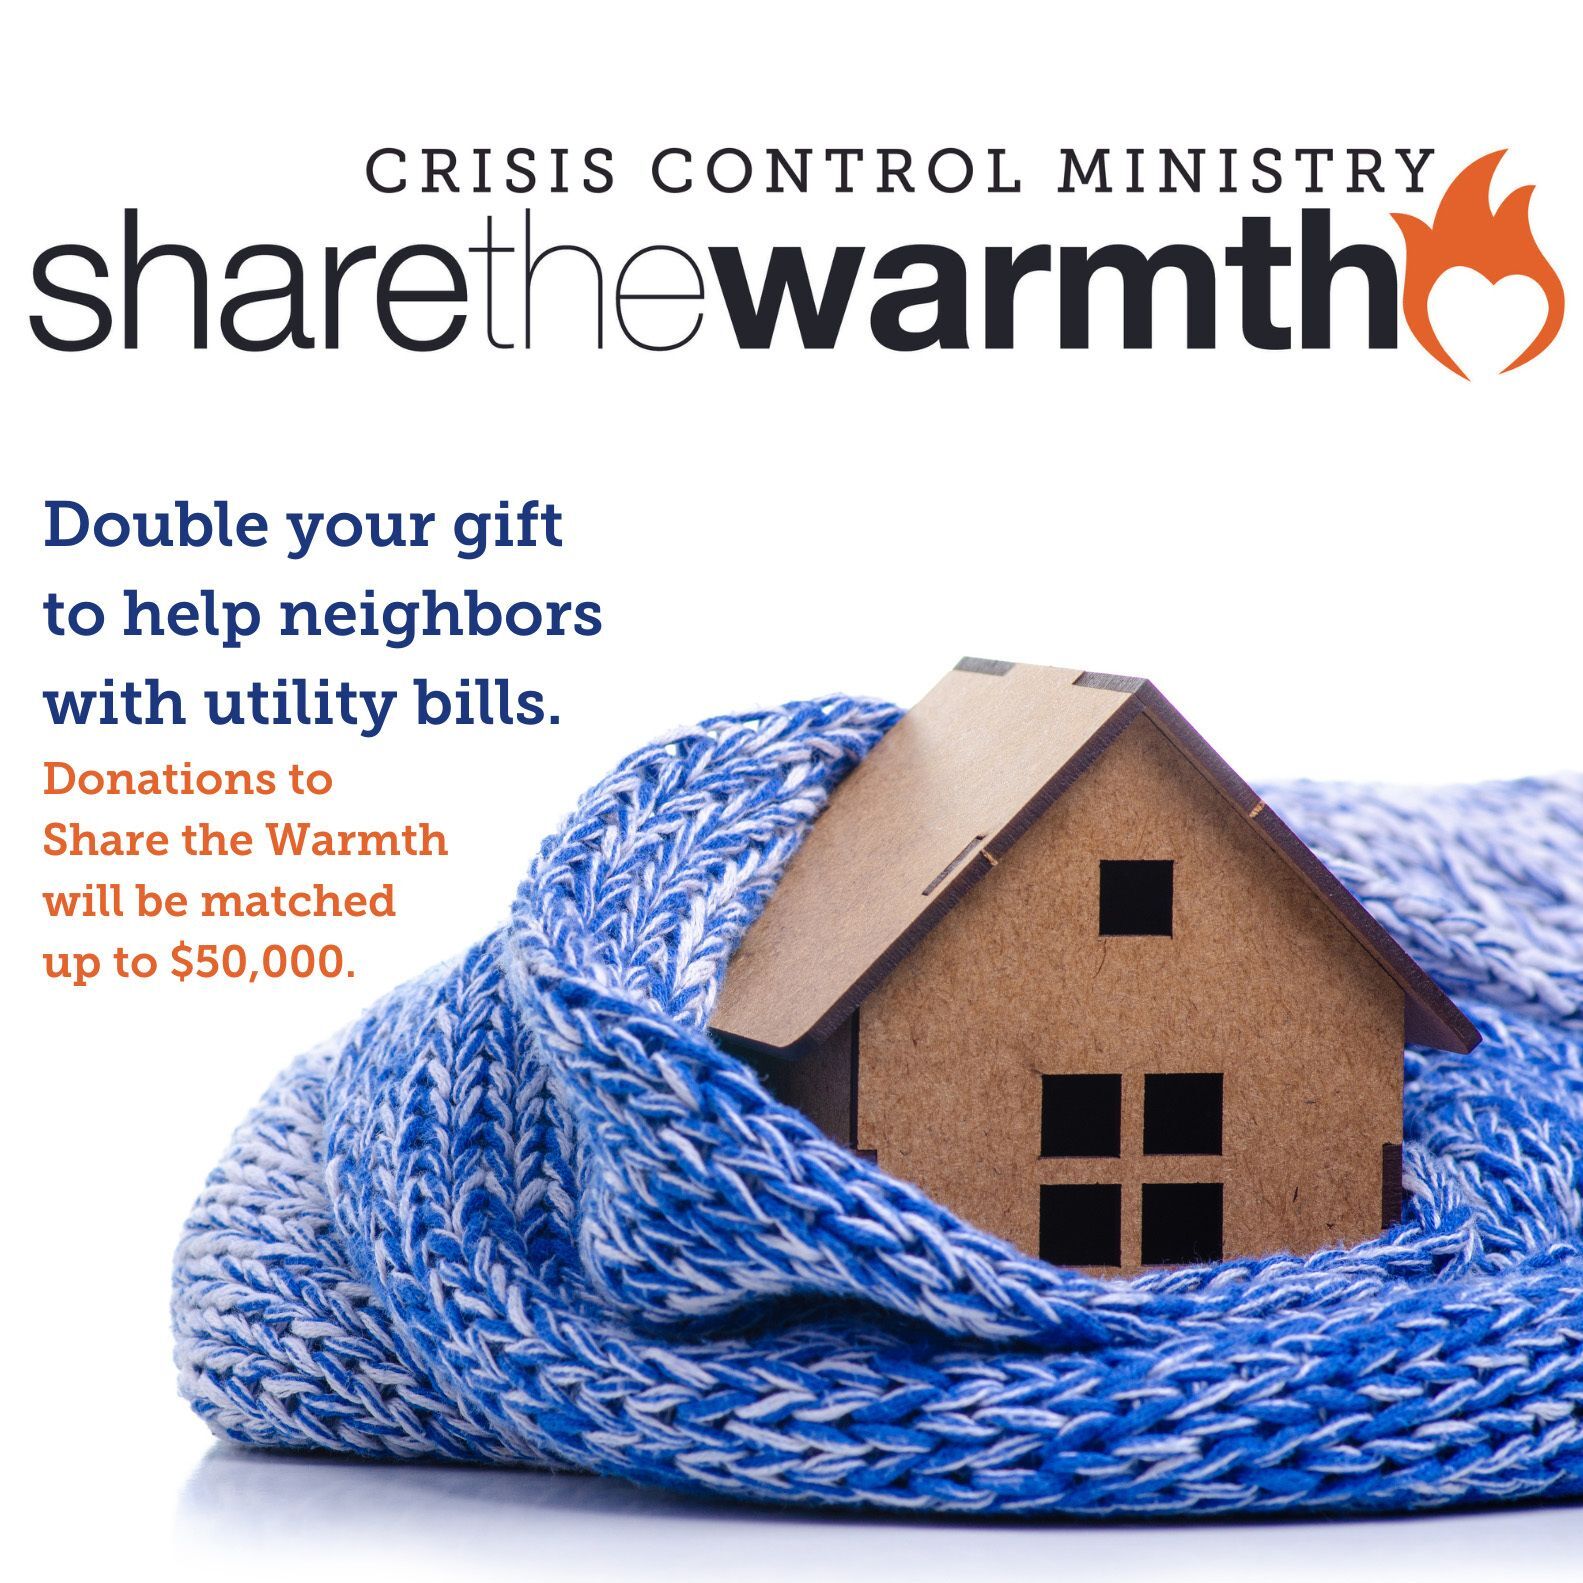 Share The Warmth this Winter.